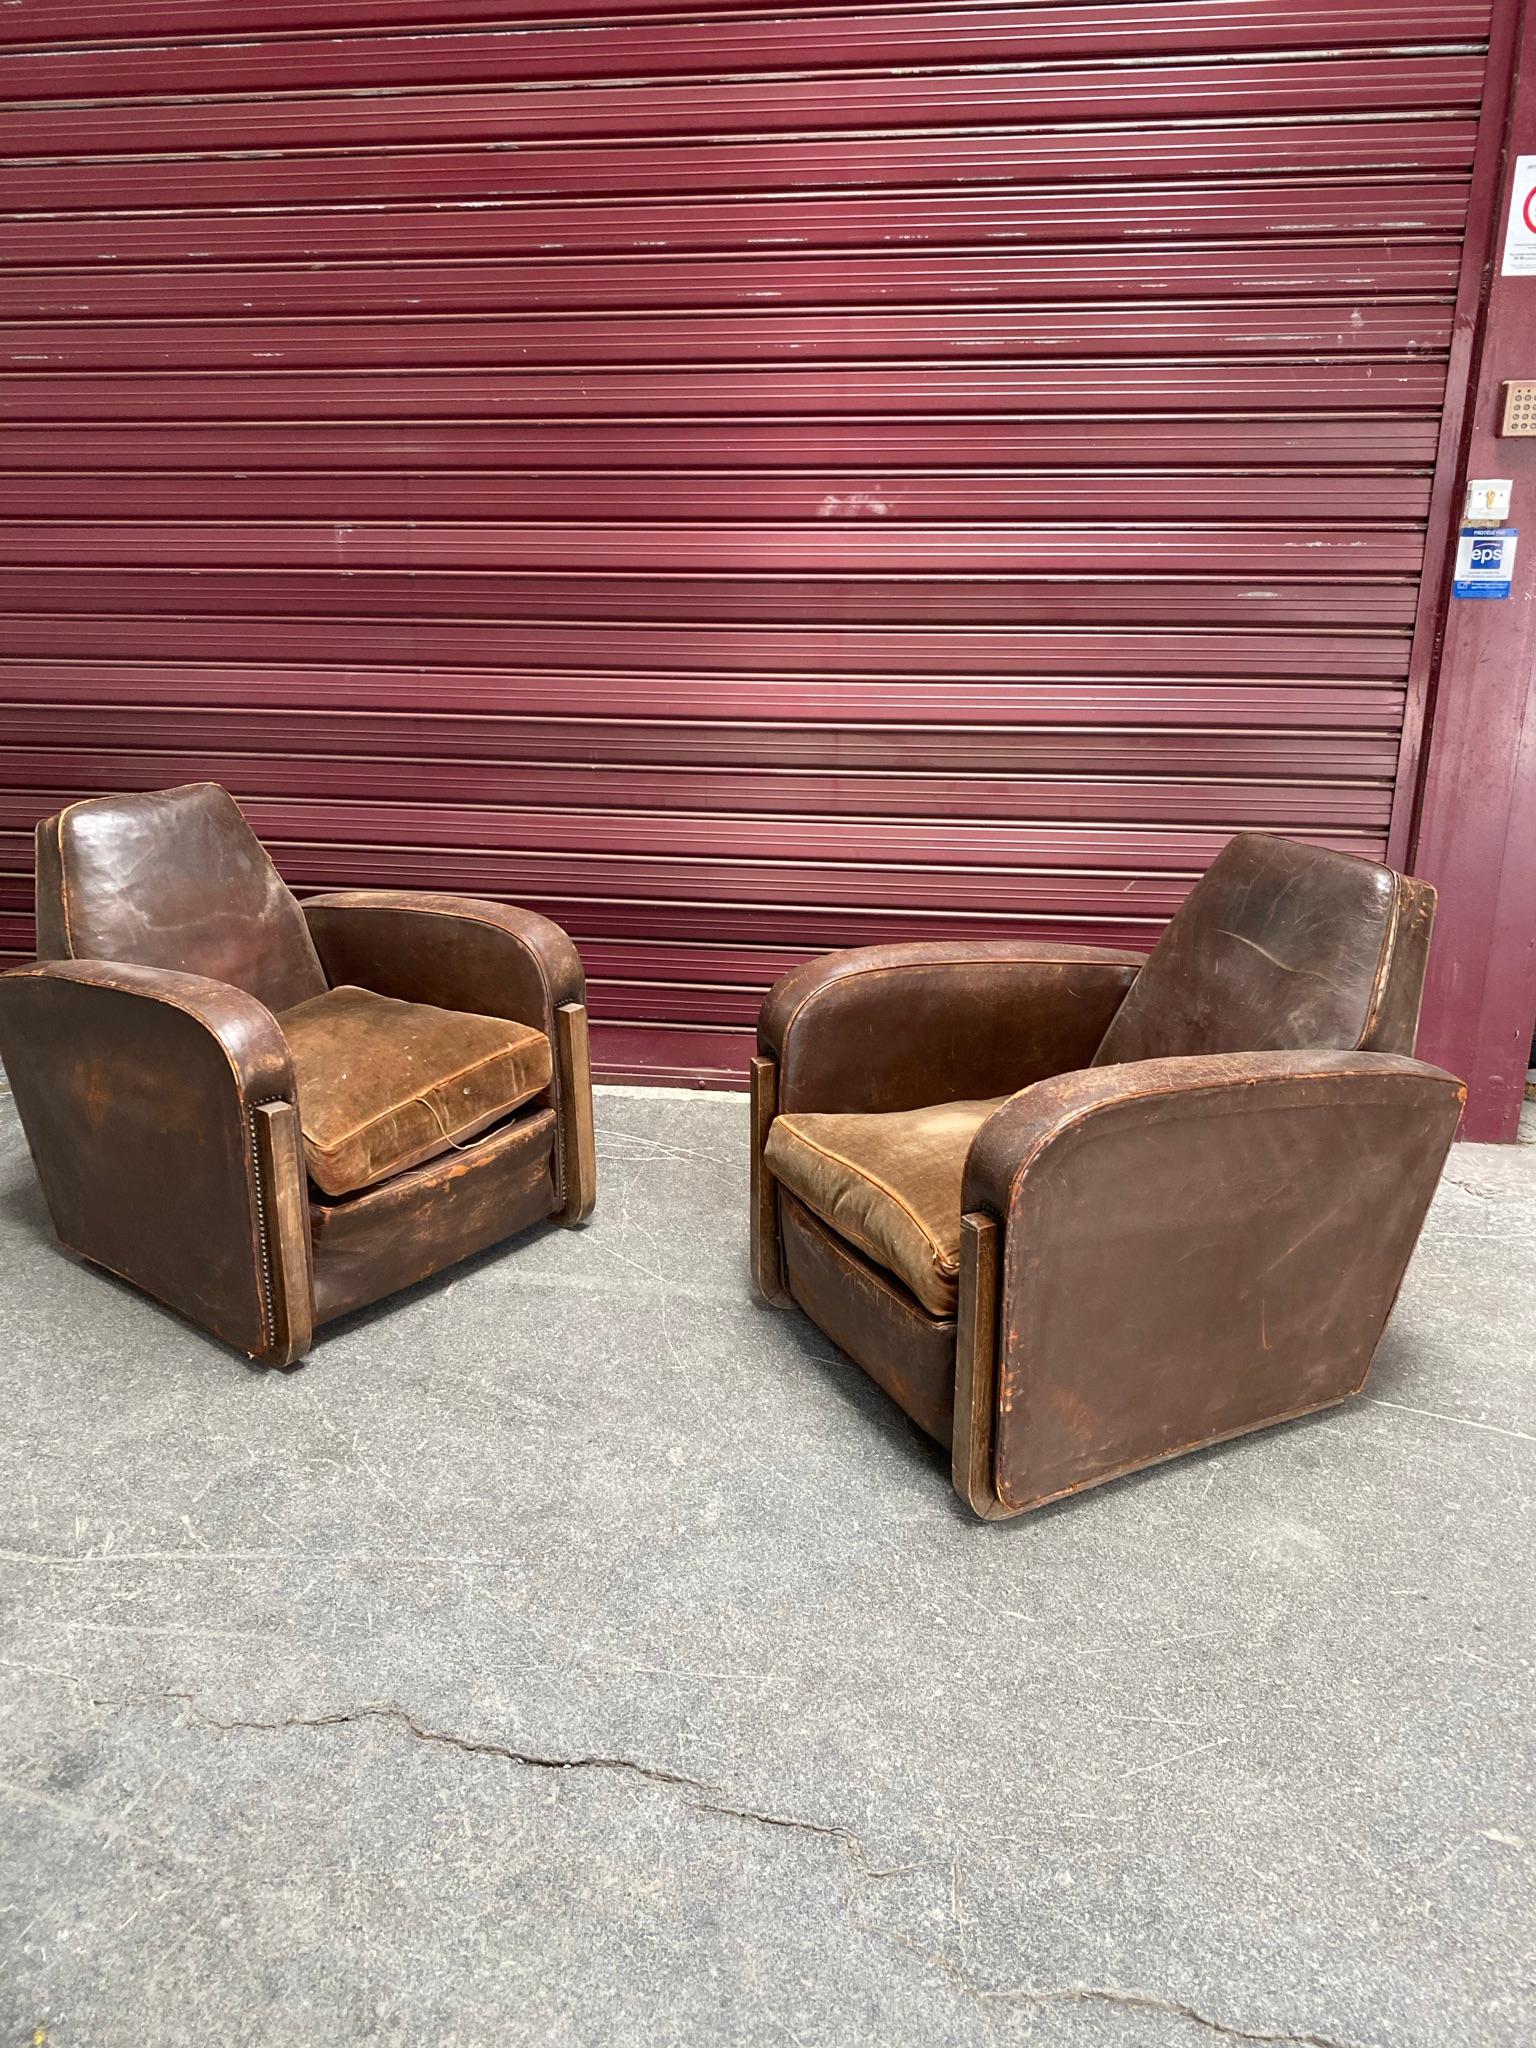 Two large elegant Art Deco armchairs covered in leather, sled base, circa 1930.
Accidents and wear on leather.